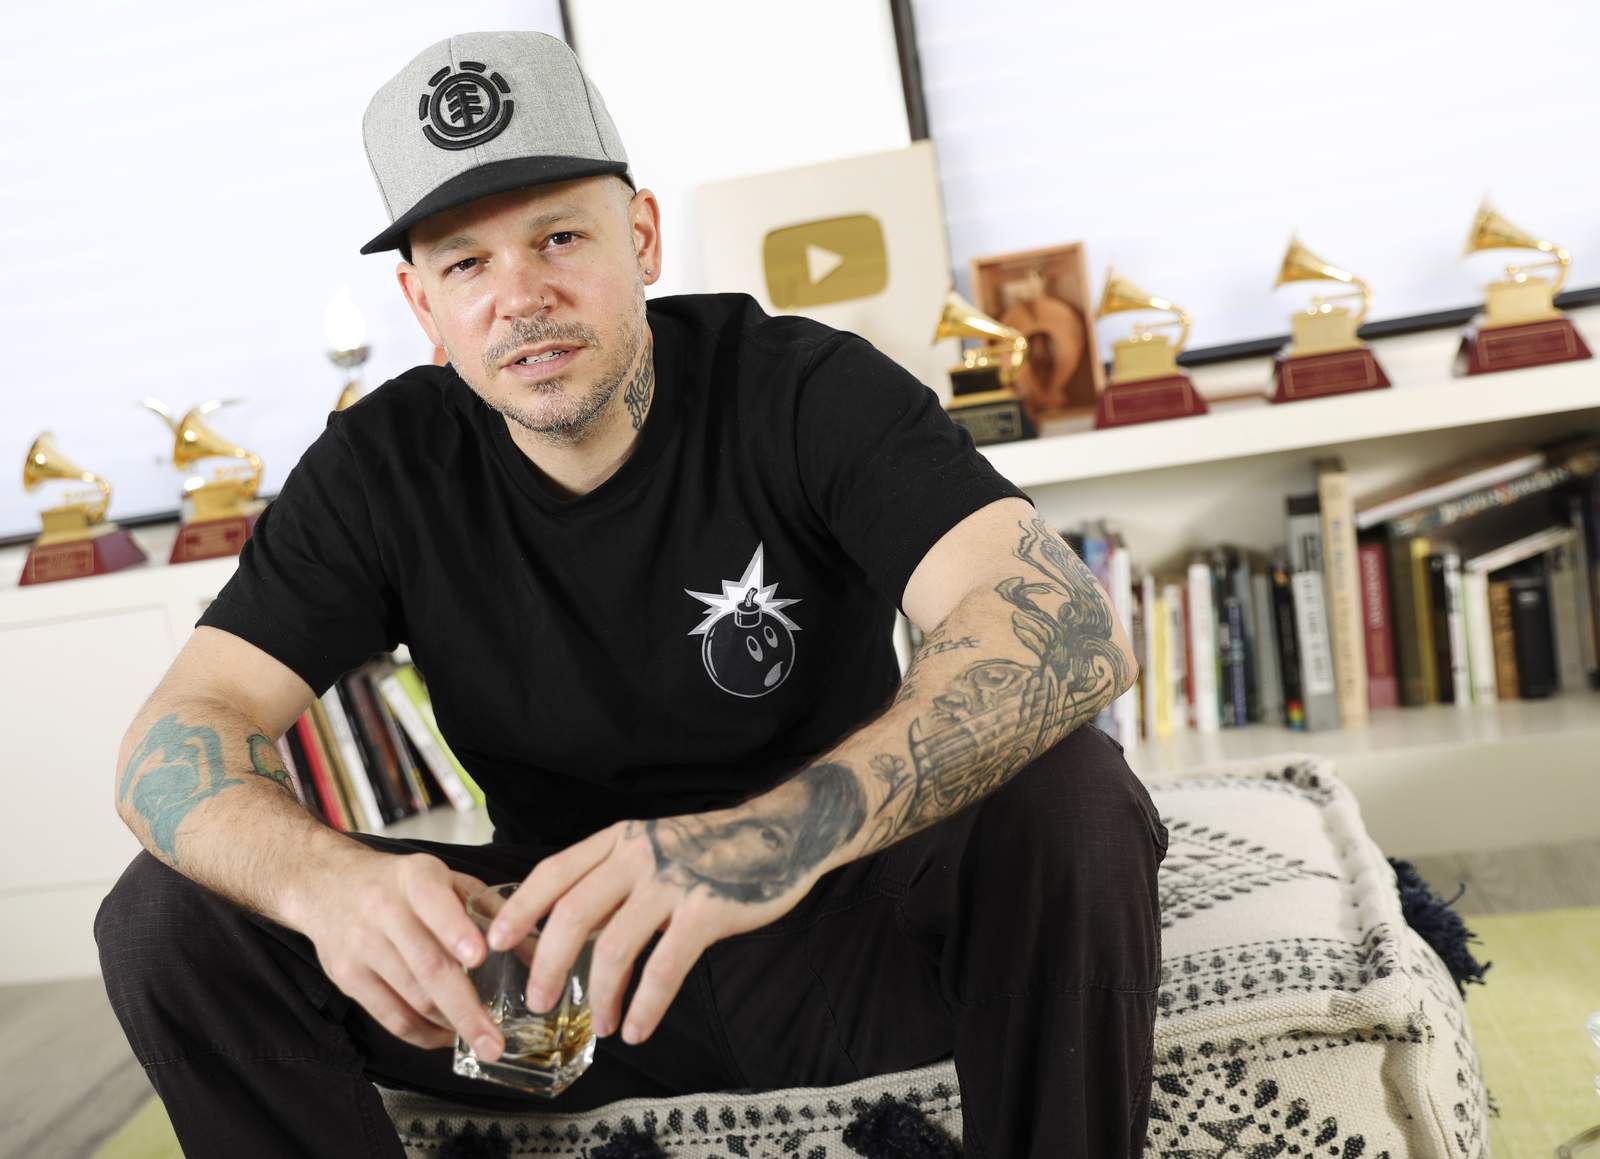 Residente signs with Sony Music to create TV, films and more